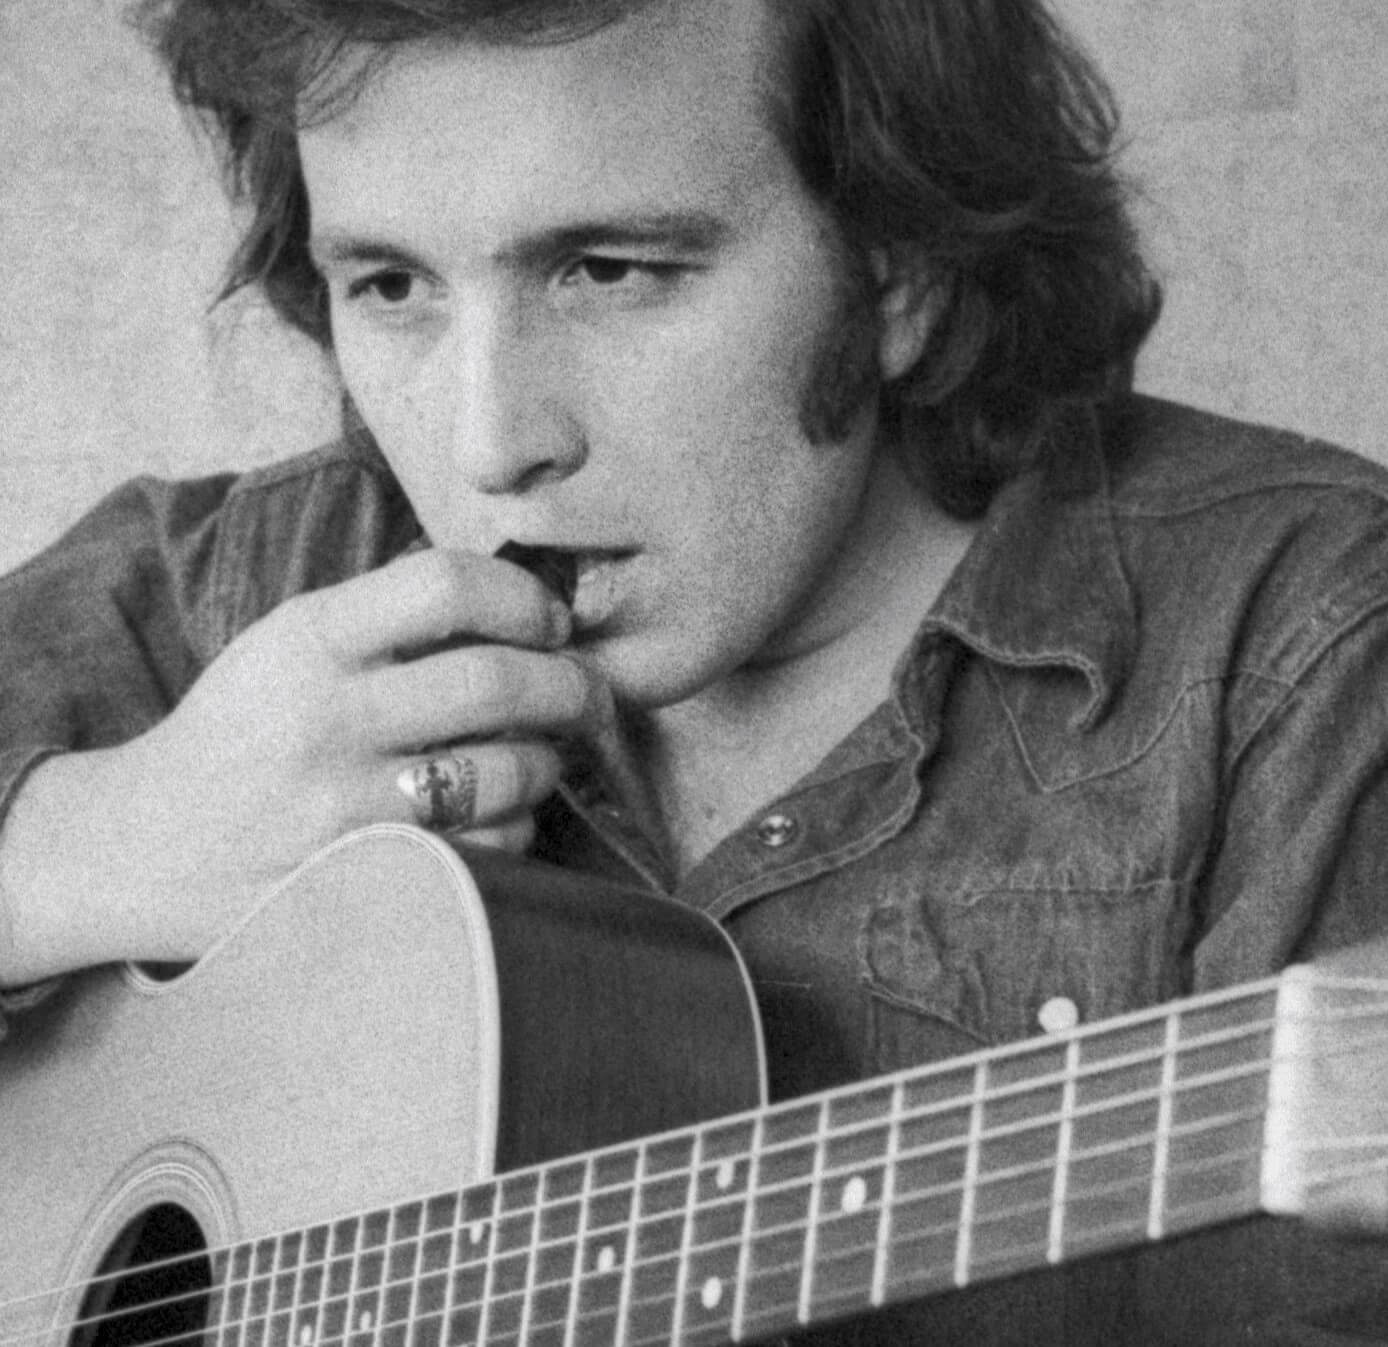 "American Pie" singer Don McLean in black-and-white